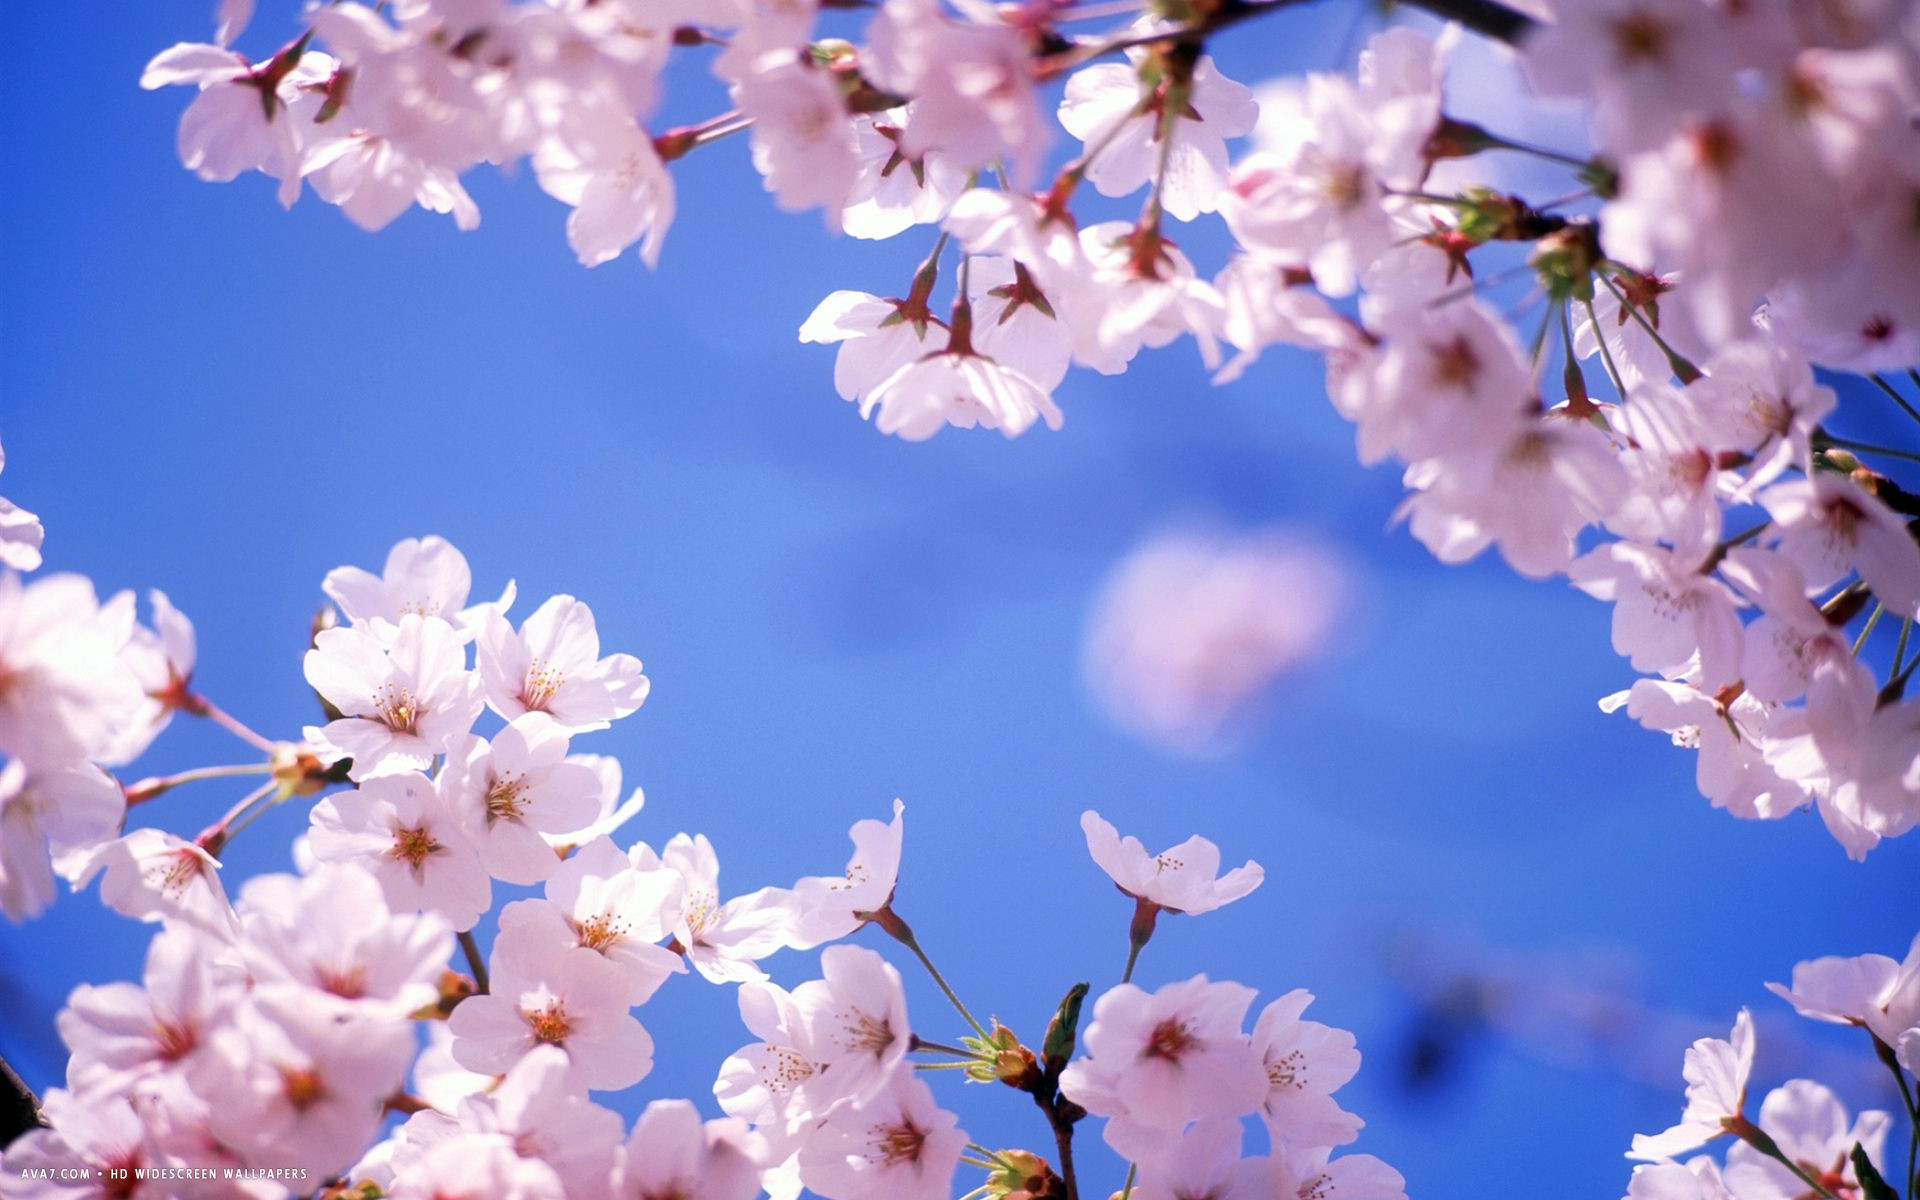 Cherry Blossom Backgrounds 76 Images